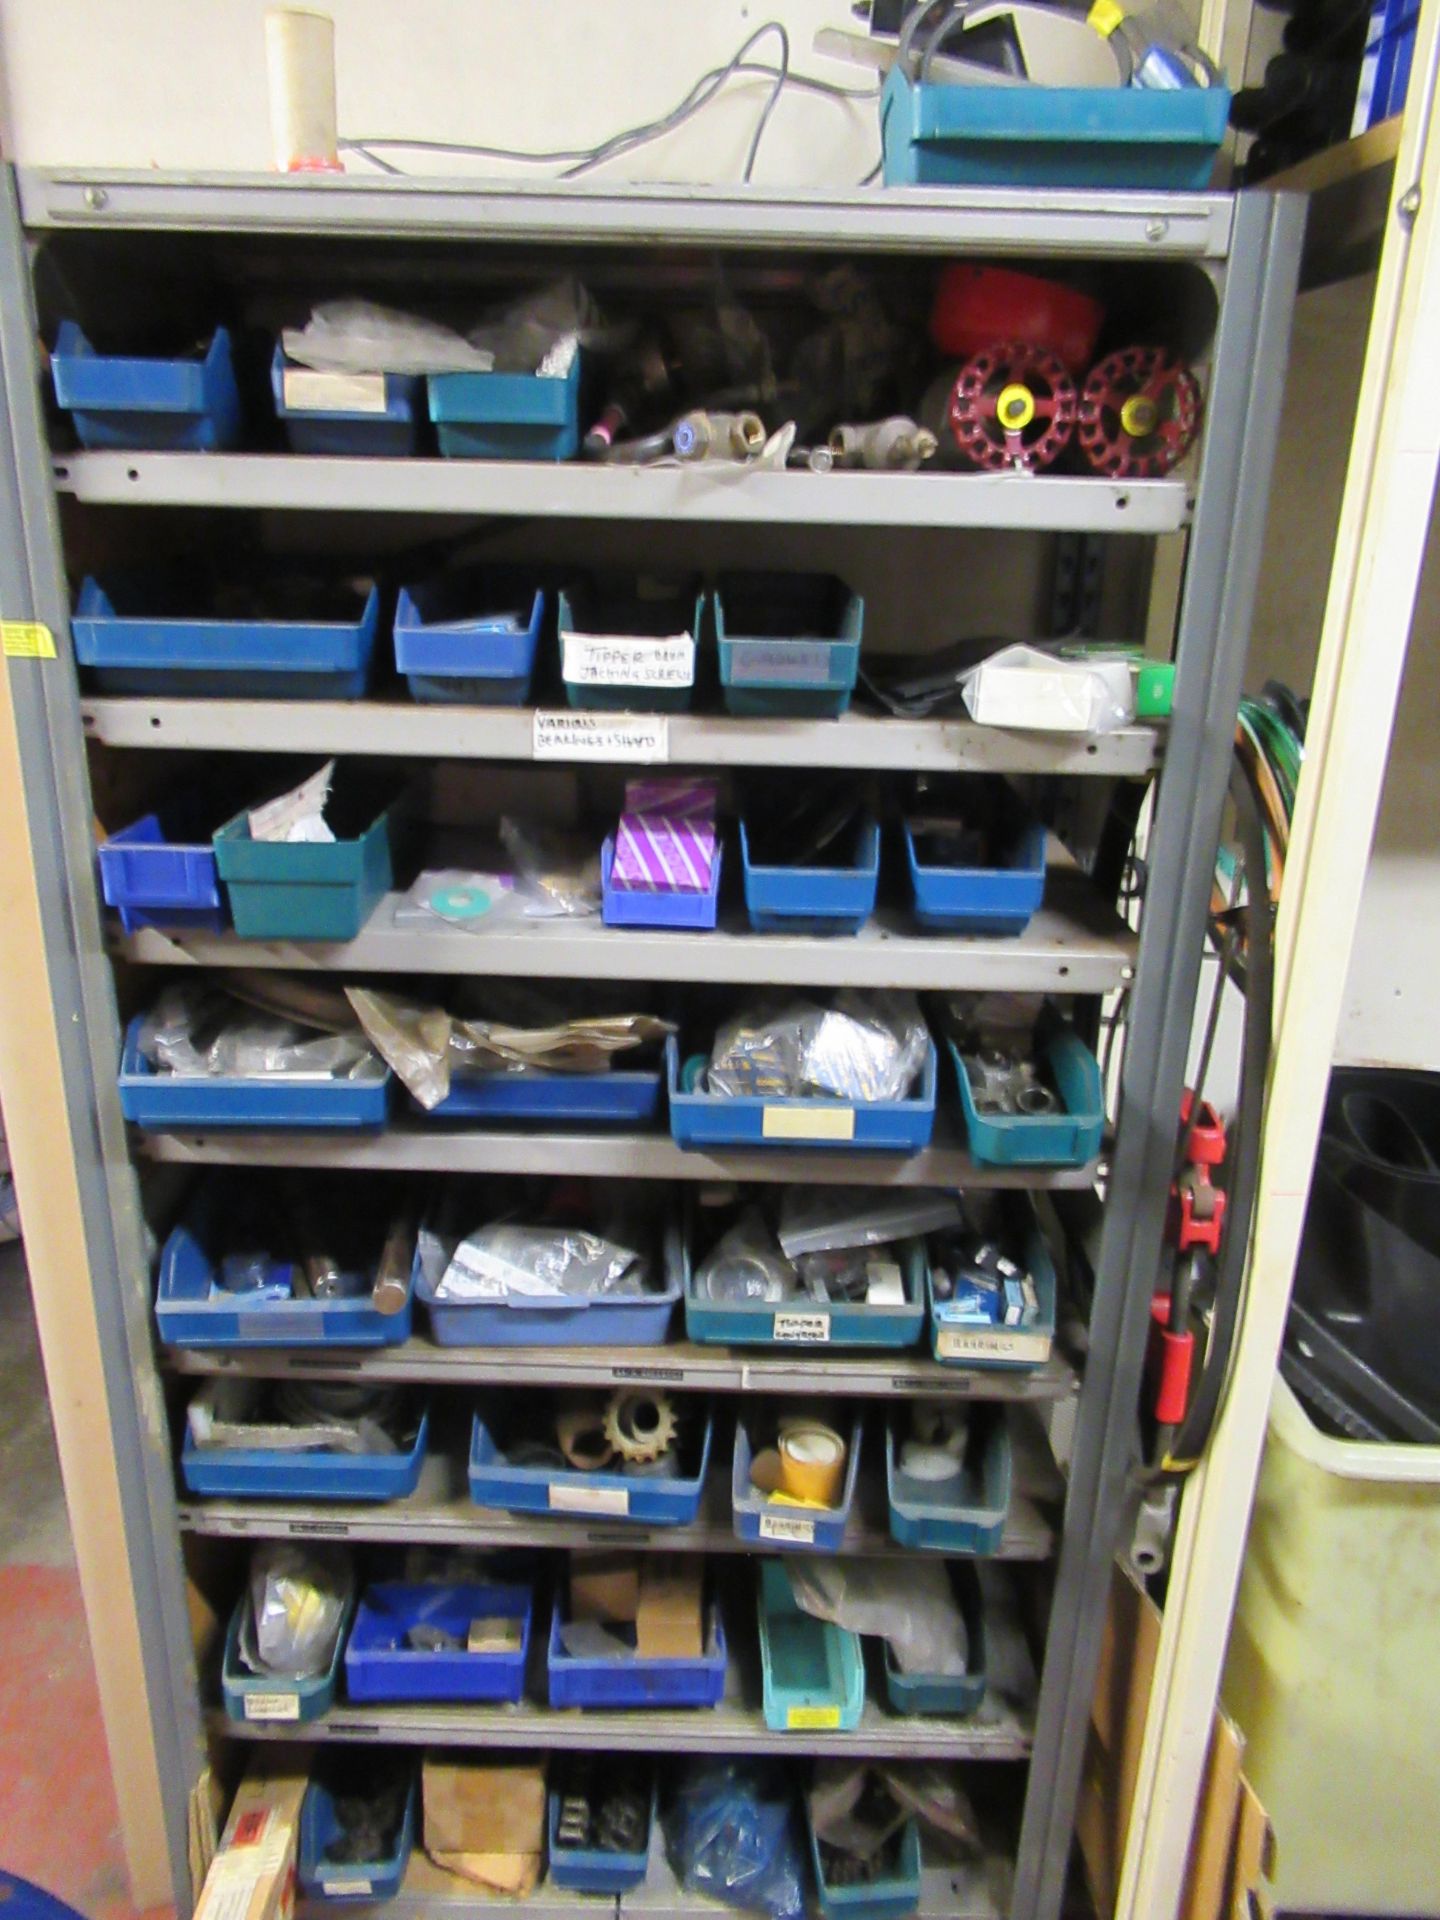 Content of 12-bays of Shelving to include Larqge qty of Spare Parts, Cable, Assorted Bearings, Valve - Image 12 of 38